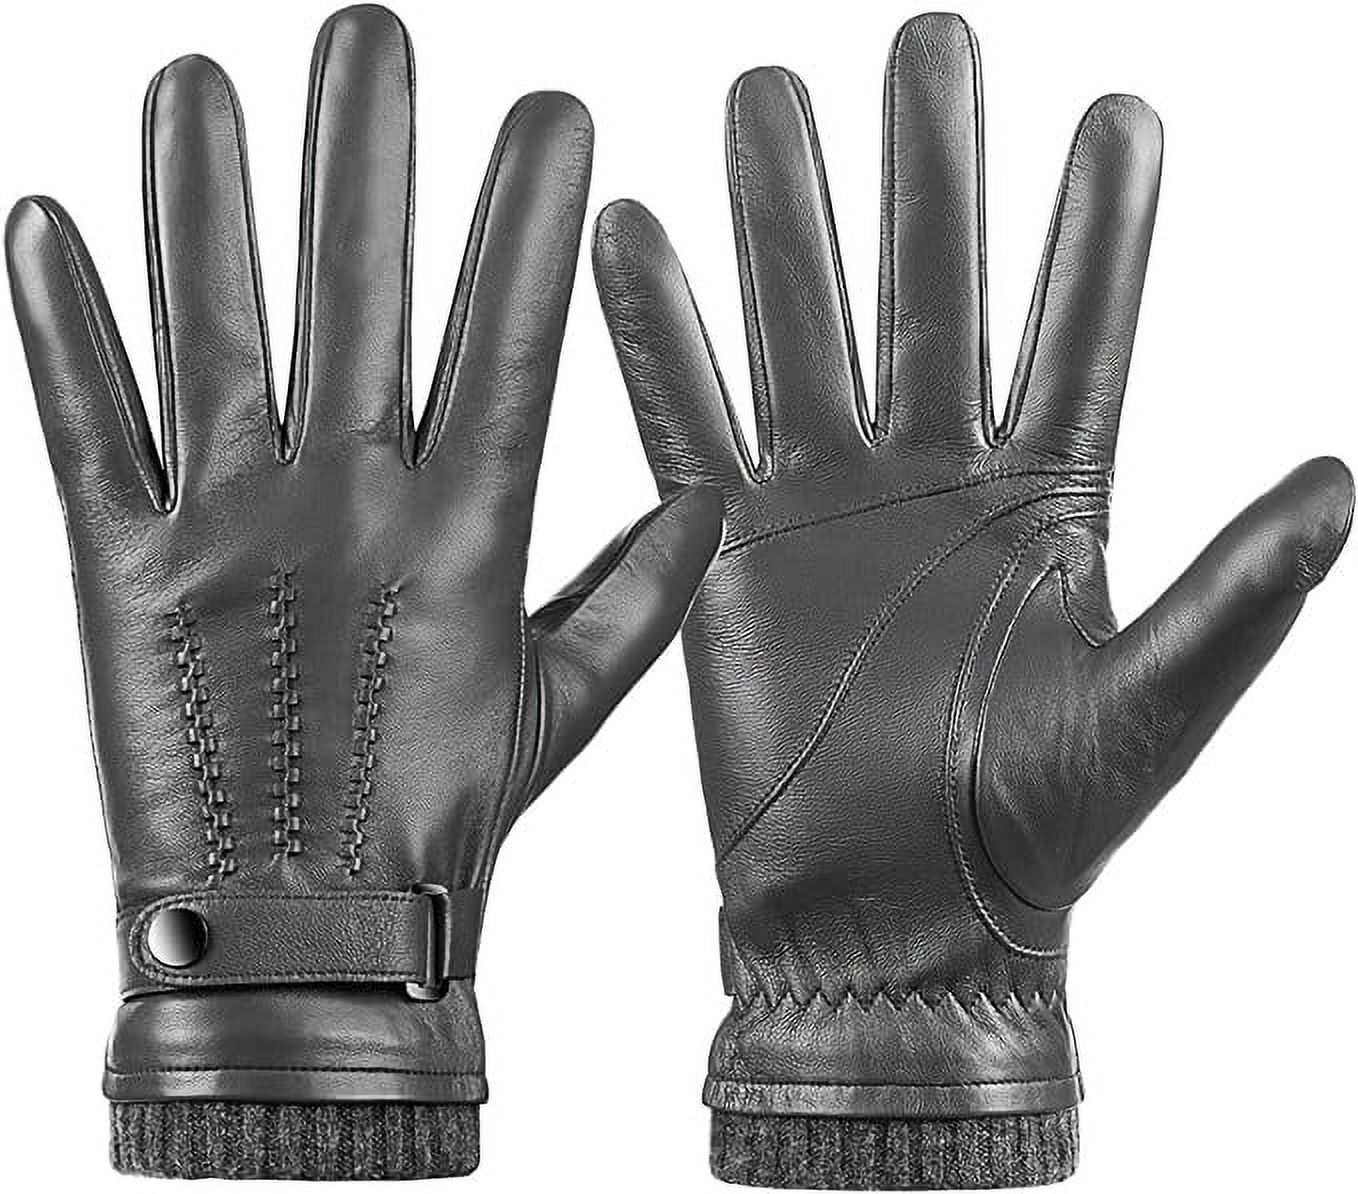 Whiteleopard Men's Winter Sheepskin Leather Gloves with Cashmere Lining, Keep Warm and Use Your Touchscreen Devices, Ideal for Outdoor Activities and Driving - image 1 of 6